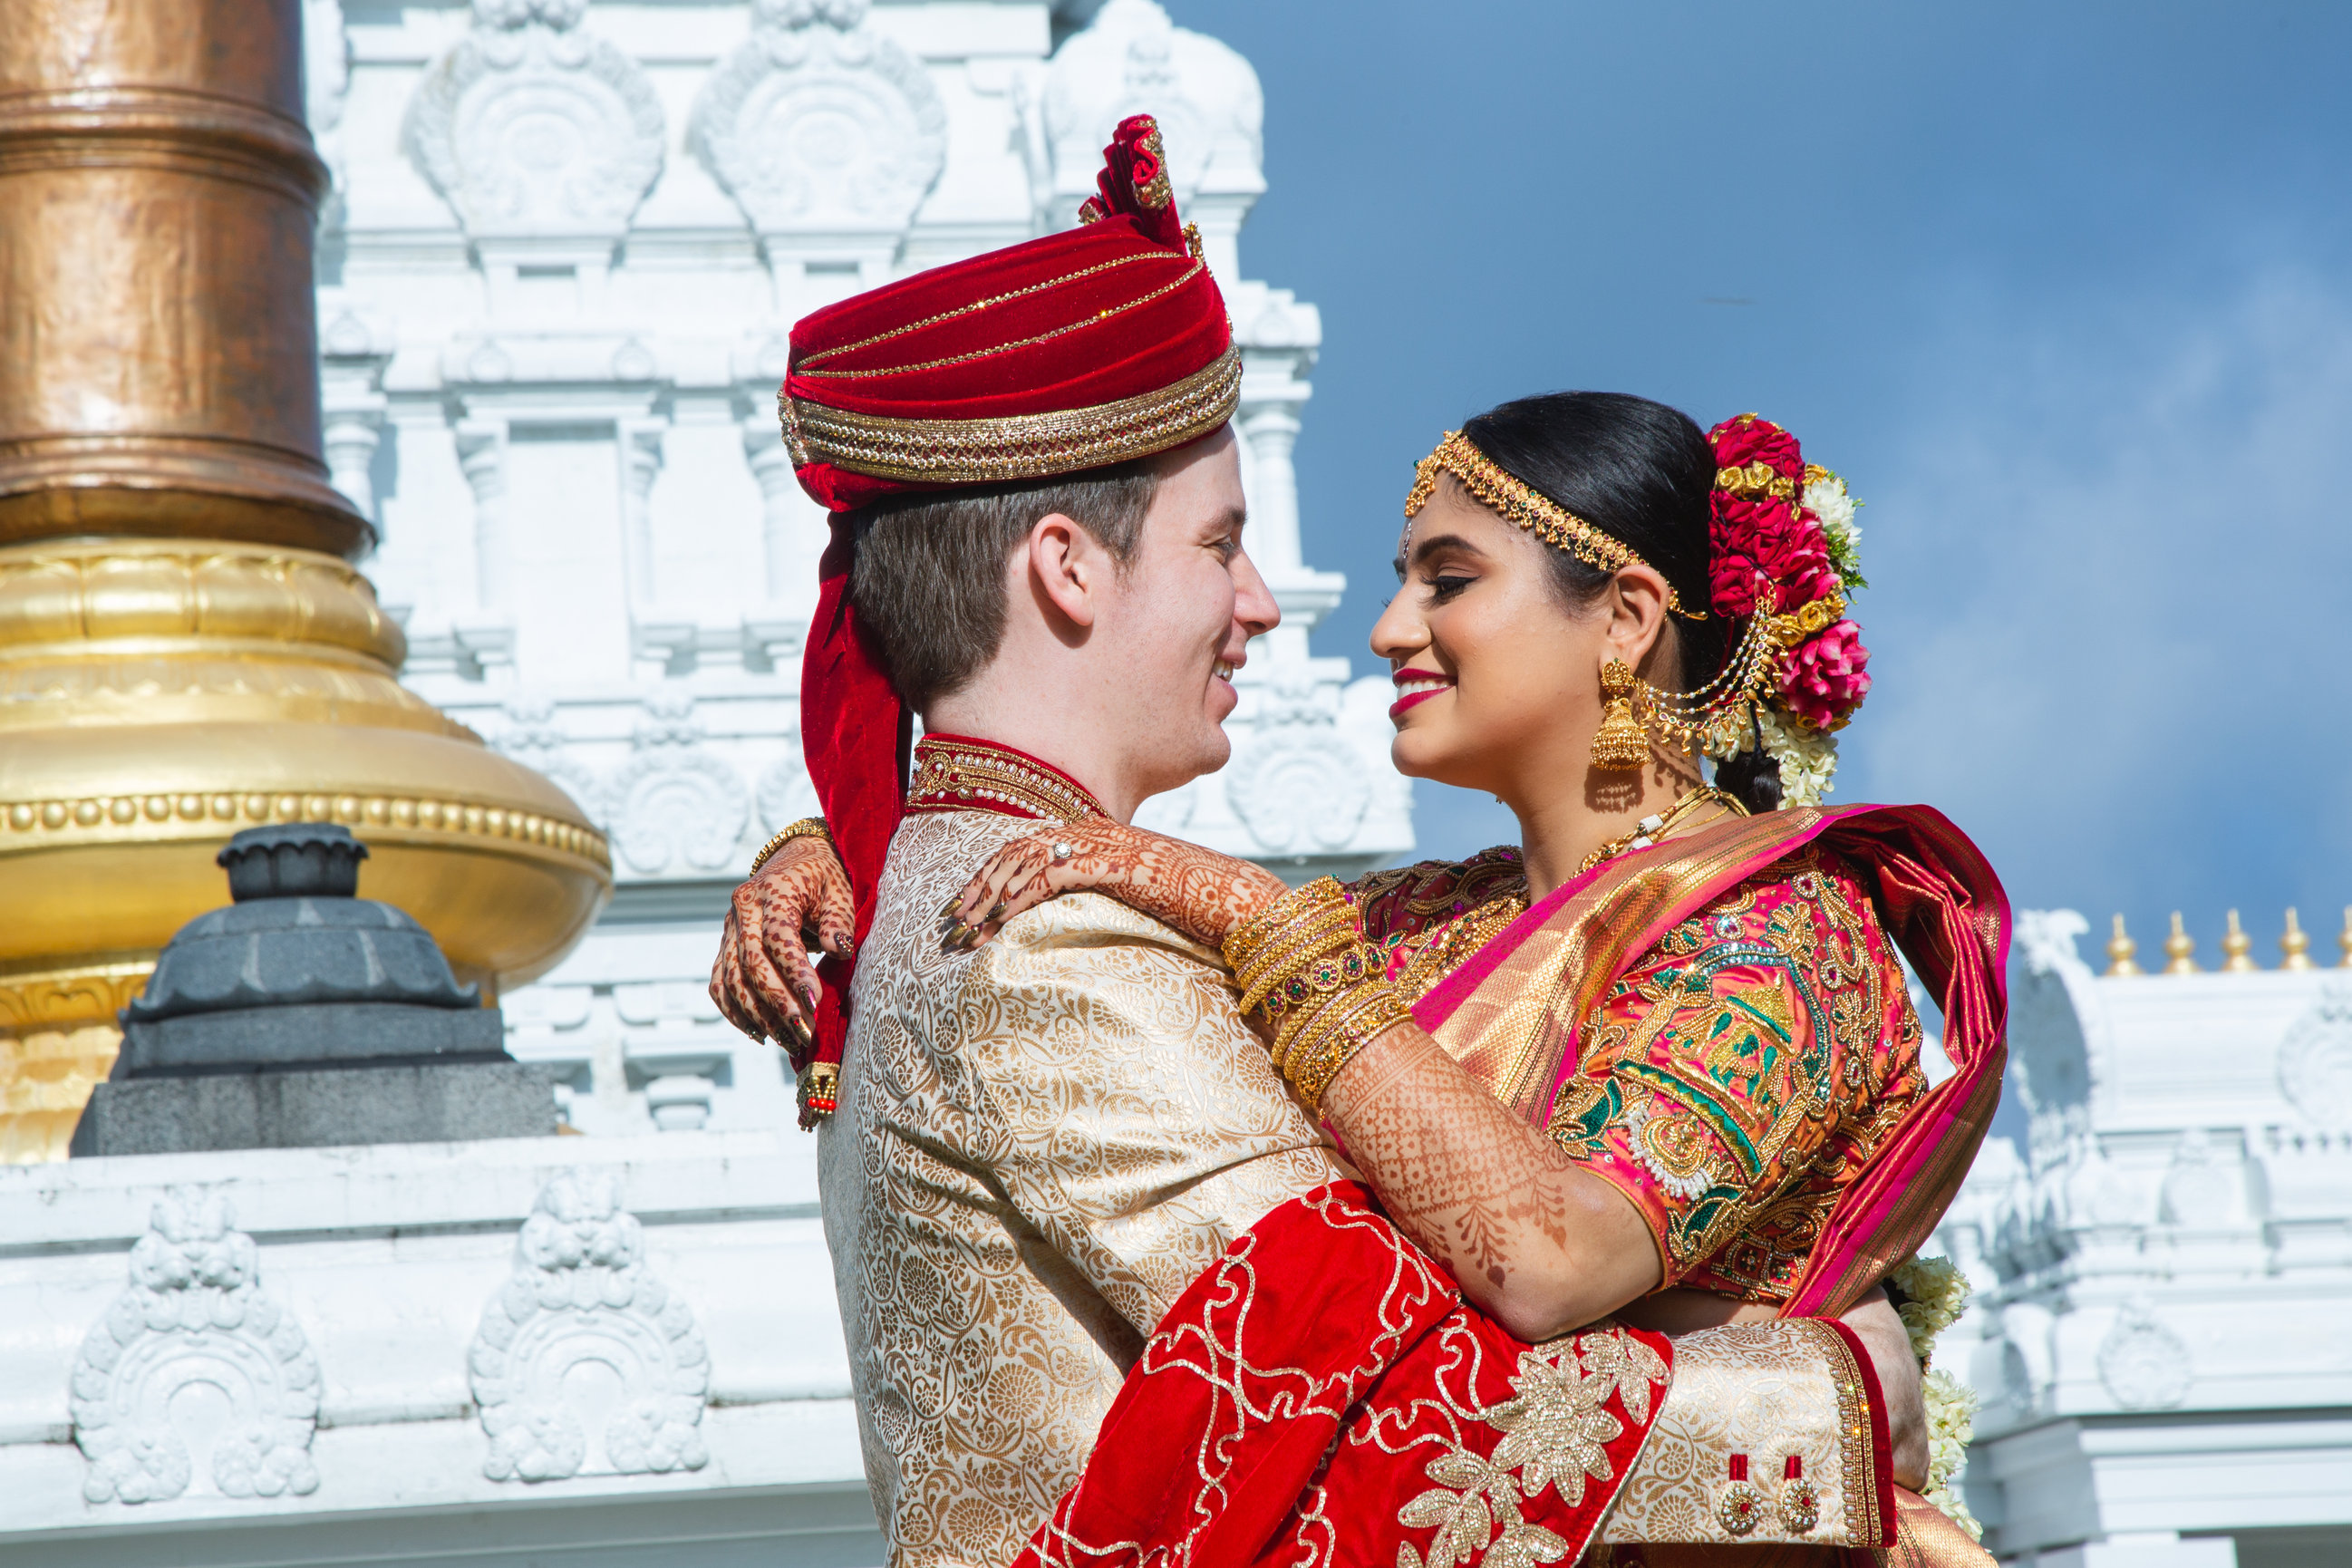 Gujarati Wedding Traditions, Rituals And Customs, Marriage Traditional Pre  And Post Wedding Rituals